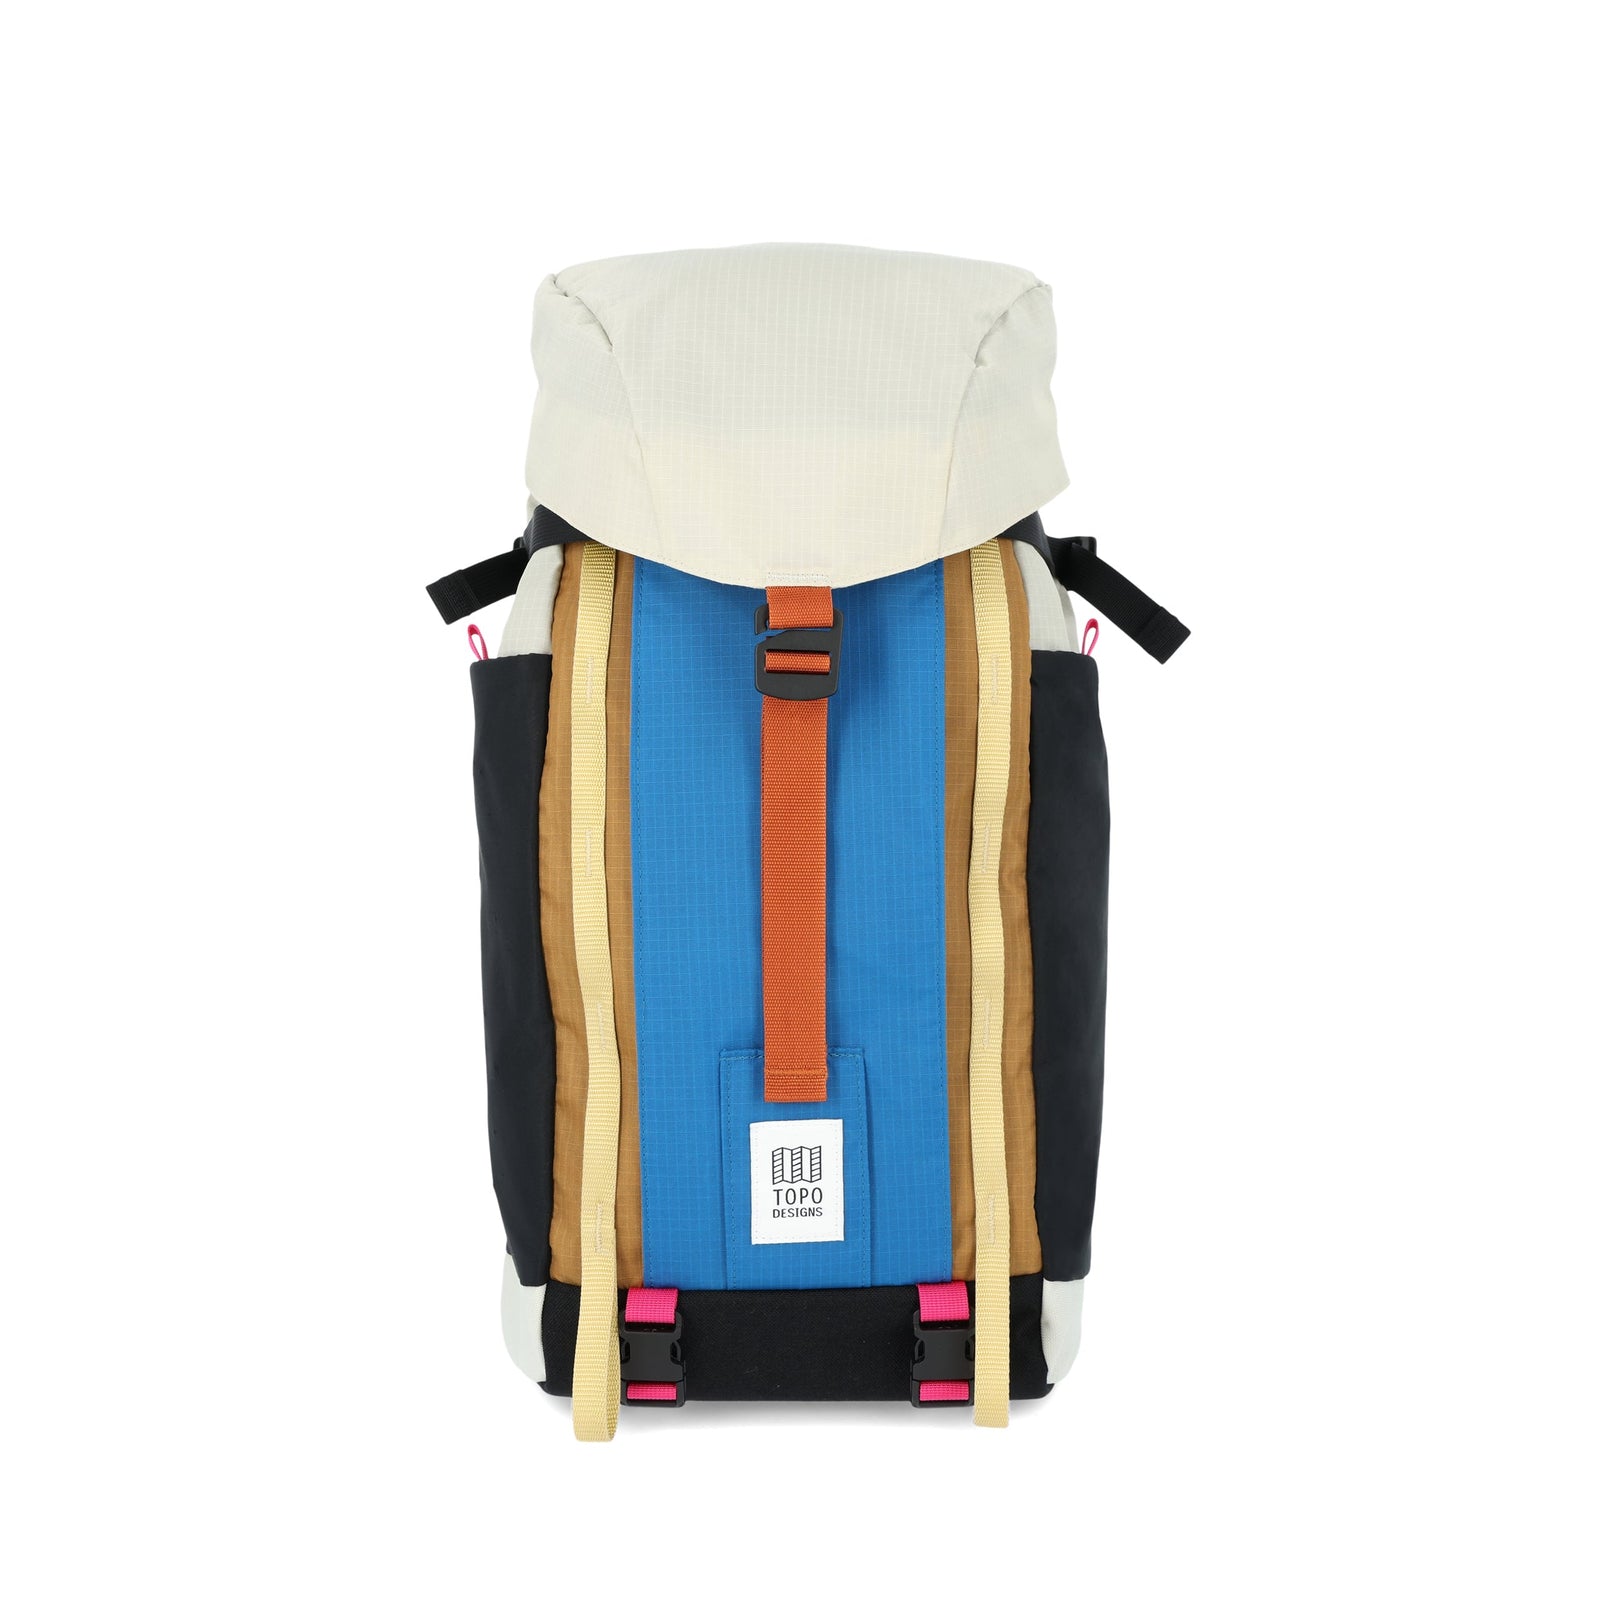 Topo Designs Mountain Pack 16L hiking backpack with internal laptop sleeve in lightweight recycled nylon "Bone White / Blue".